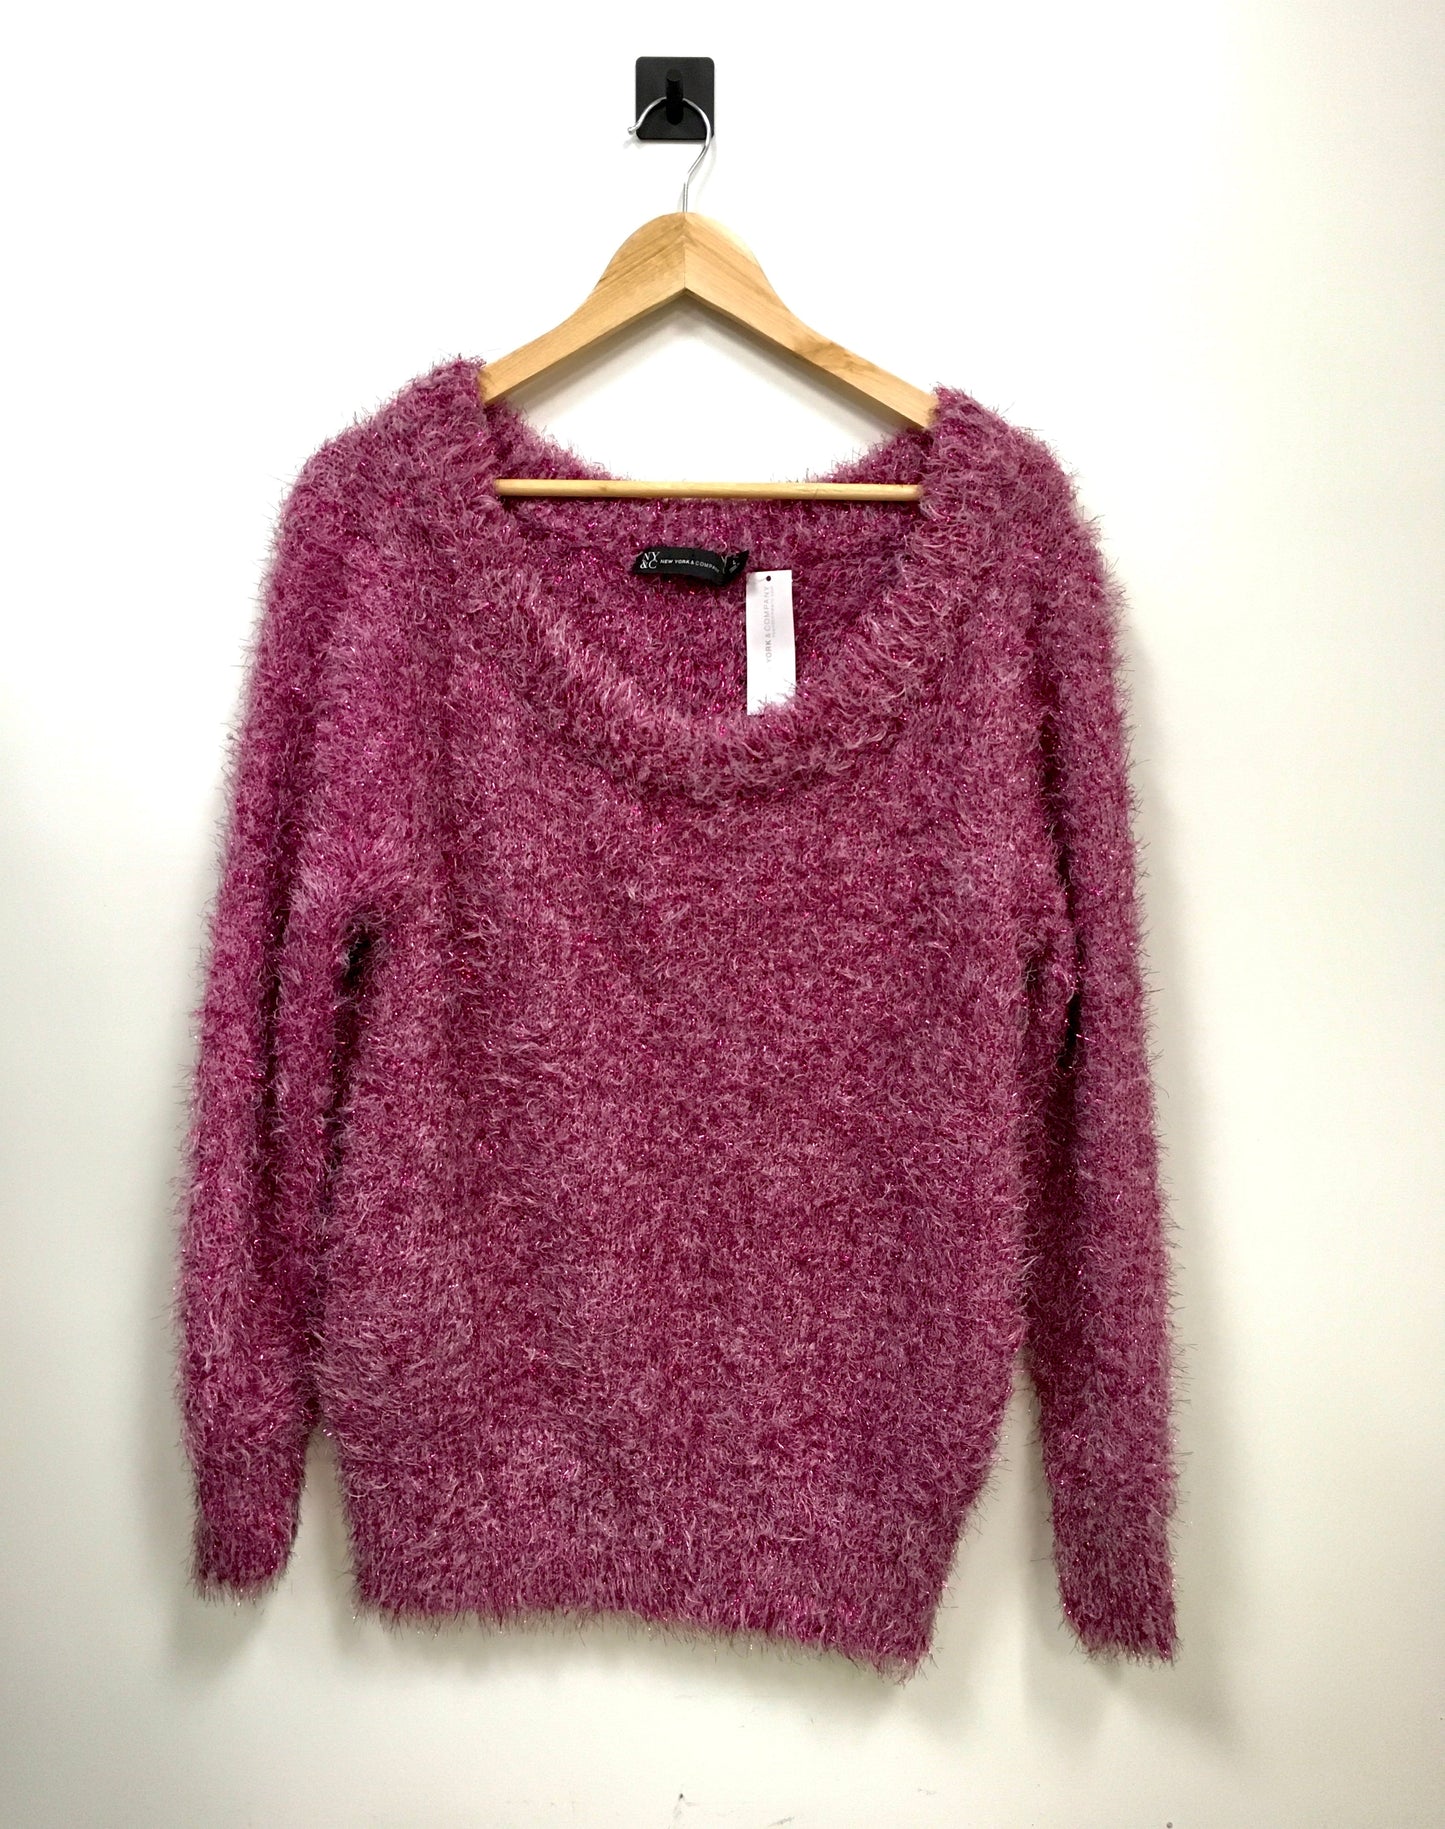 Sweater By New York And Co  Size: L